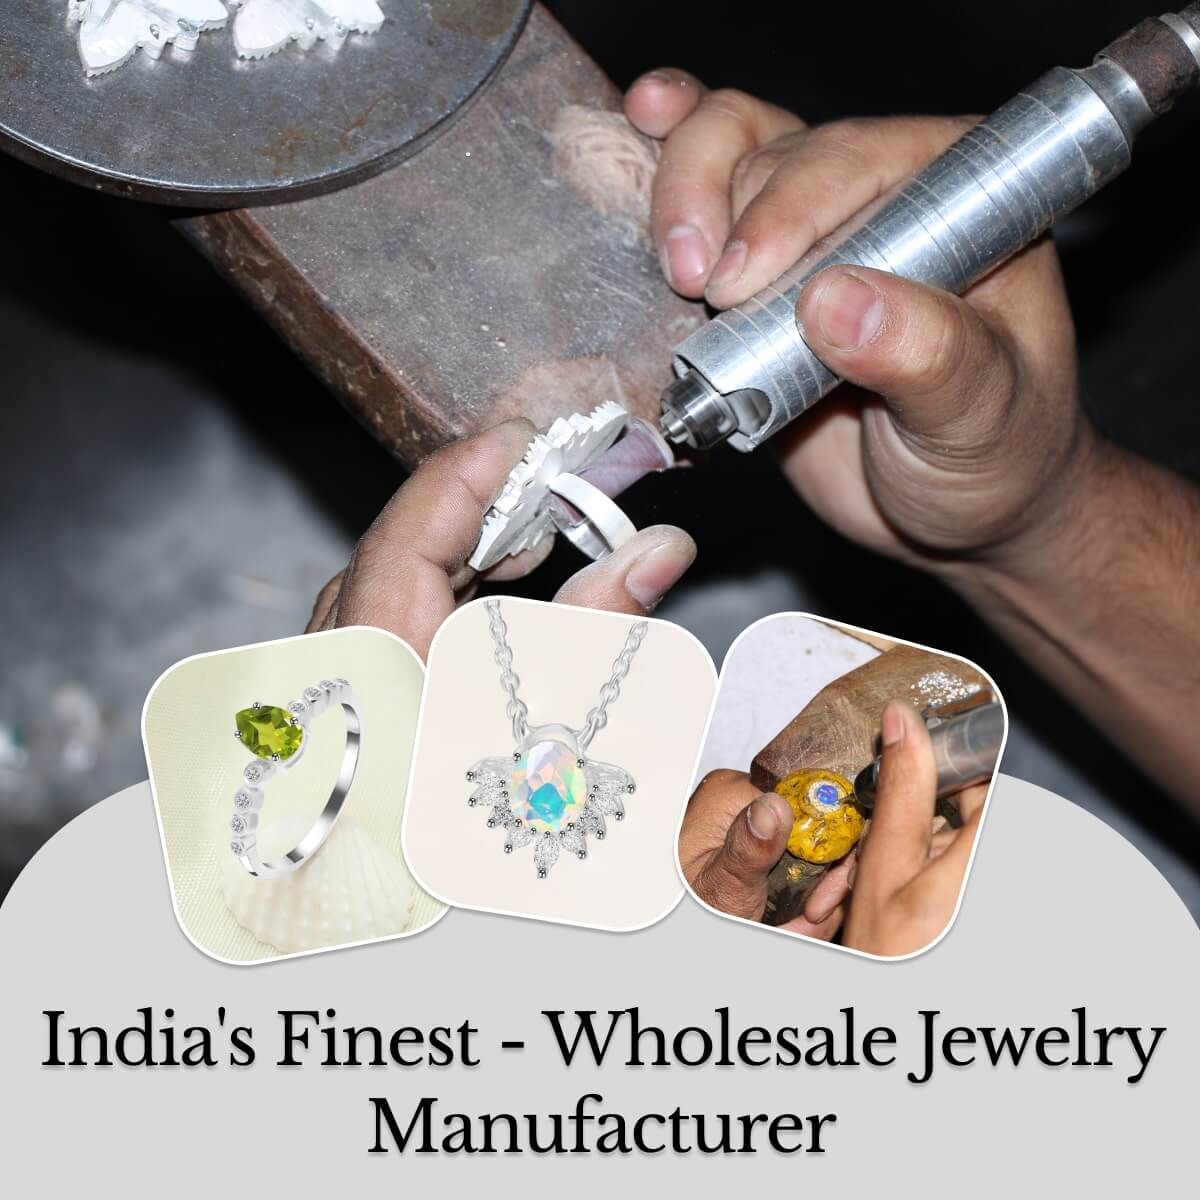 Wholesale Jewelry Manufacturer India